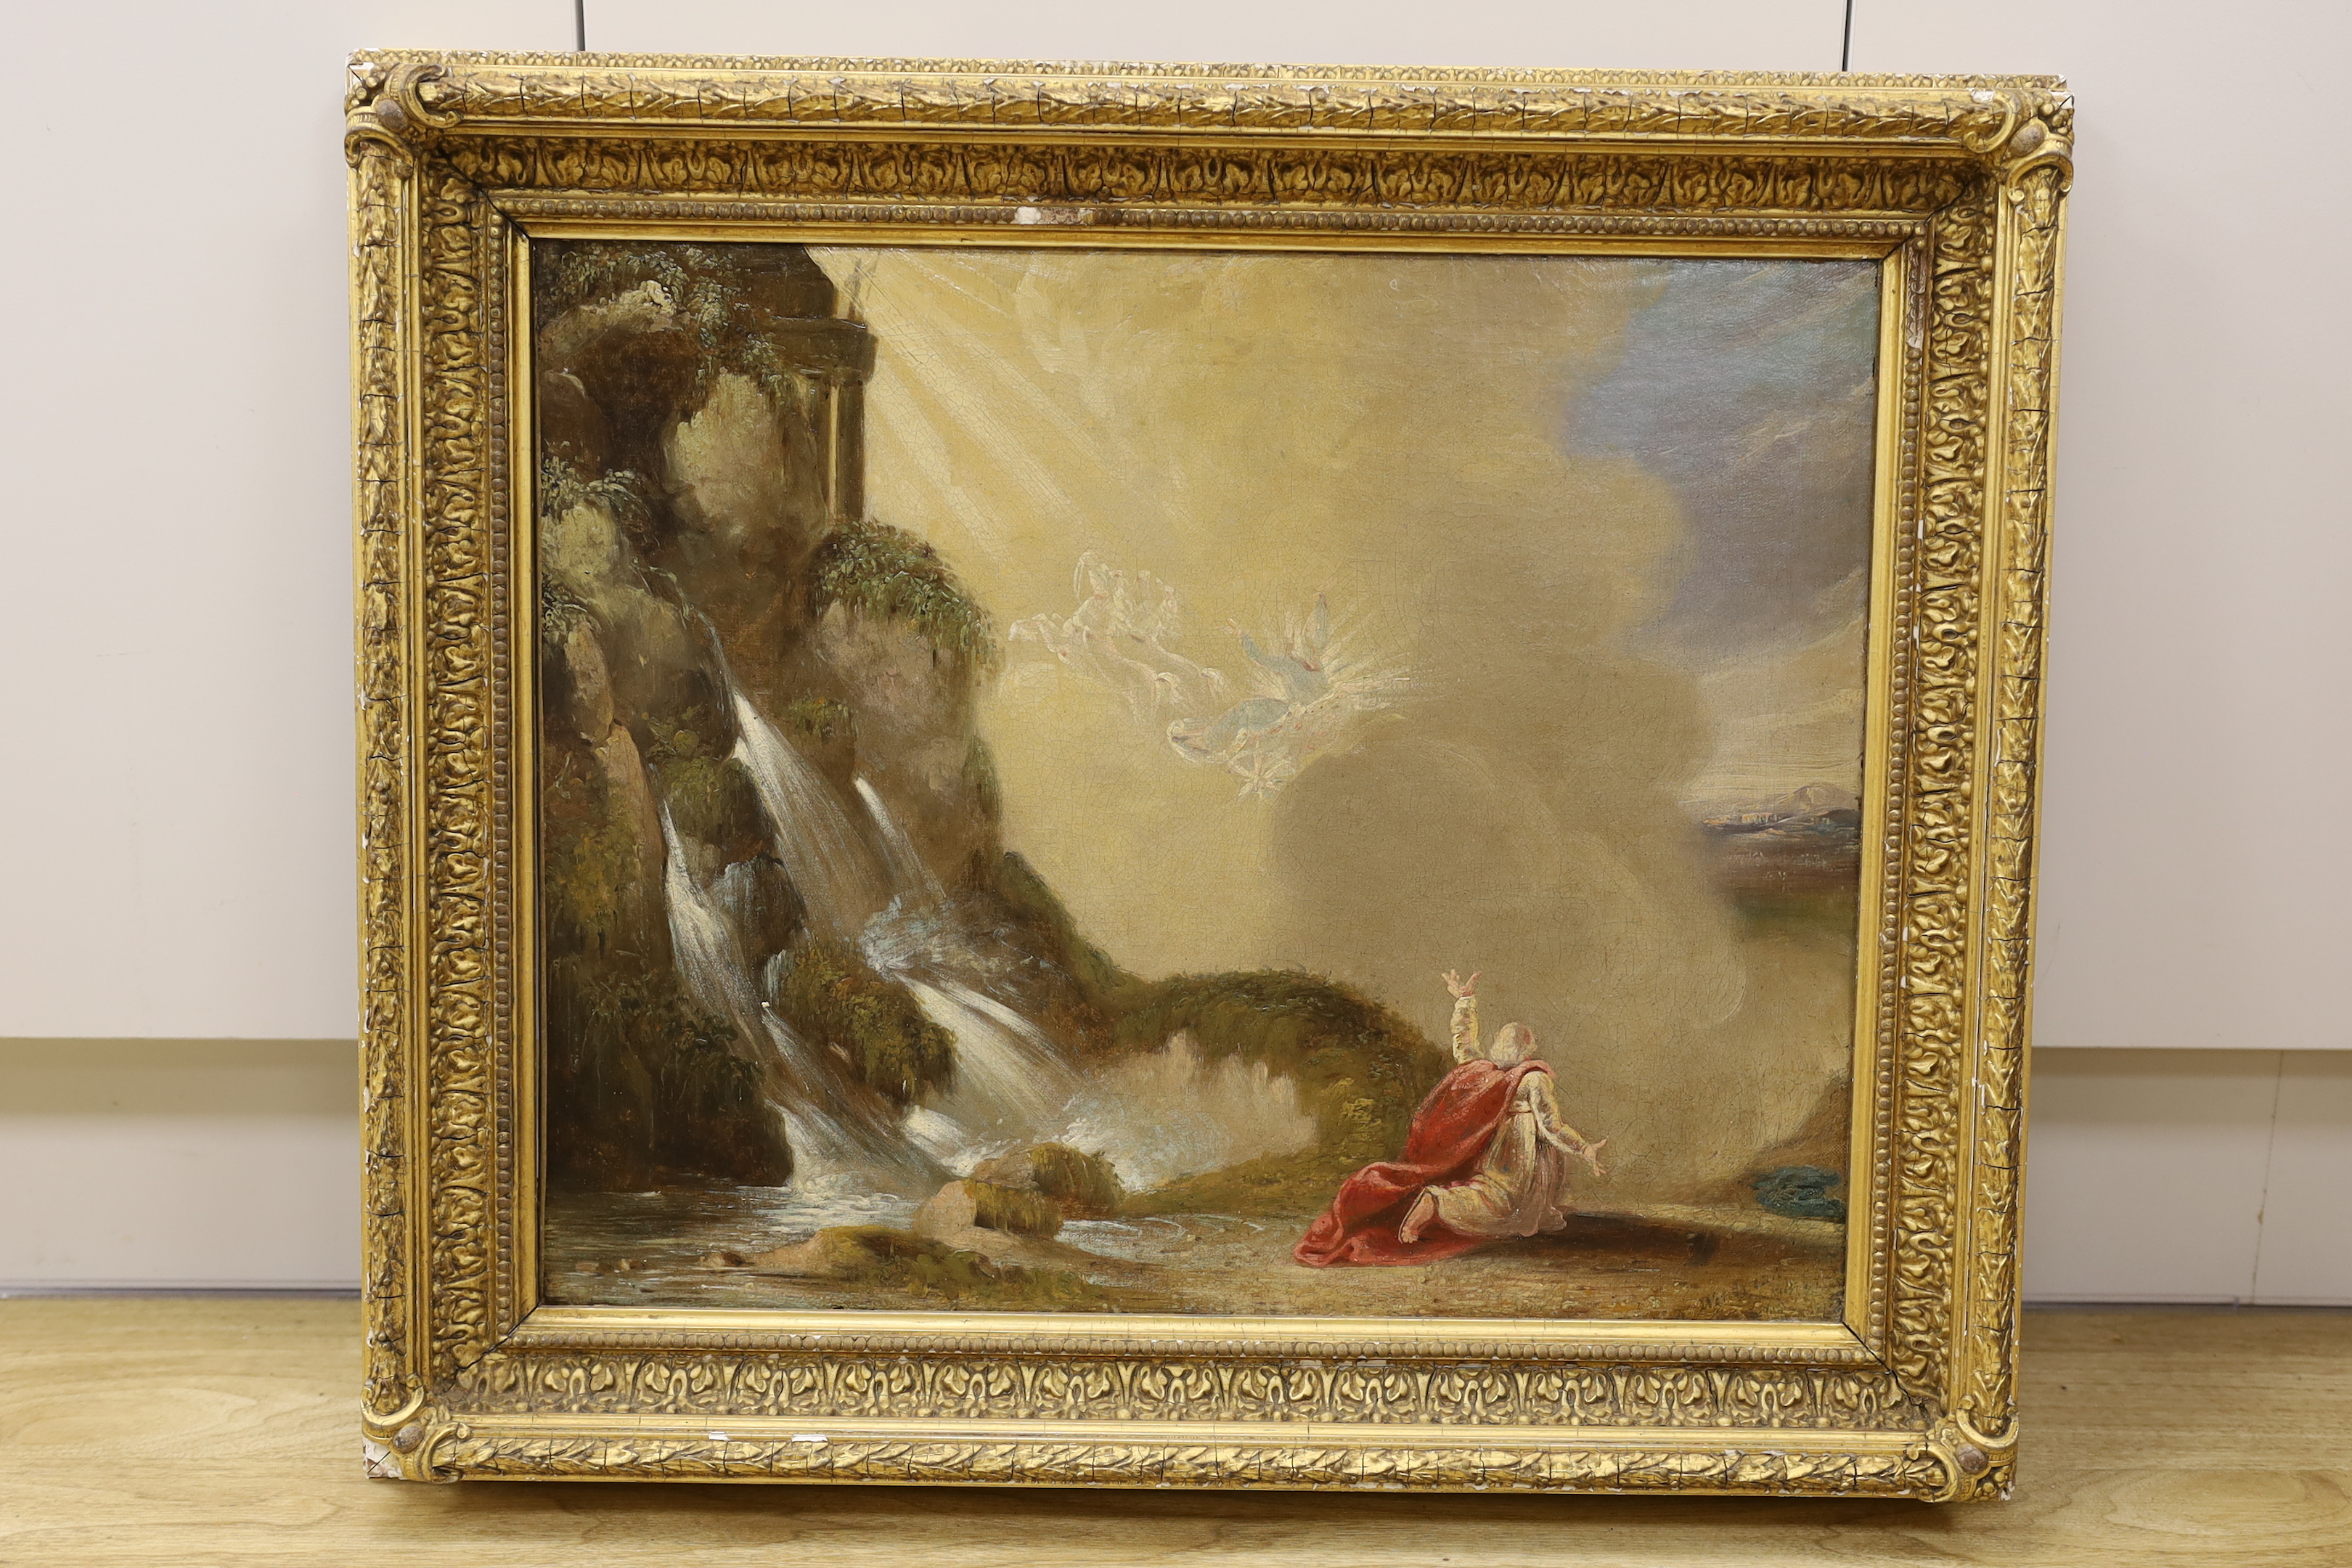 19th century English School, oil on canvas, Moses parting the Red Sea, indistinctly signed, 42 x 52cm